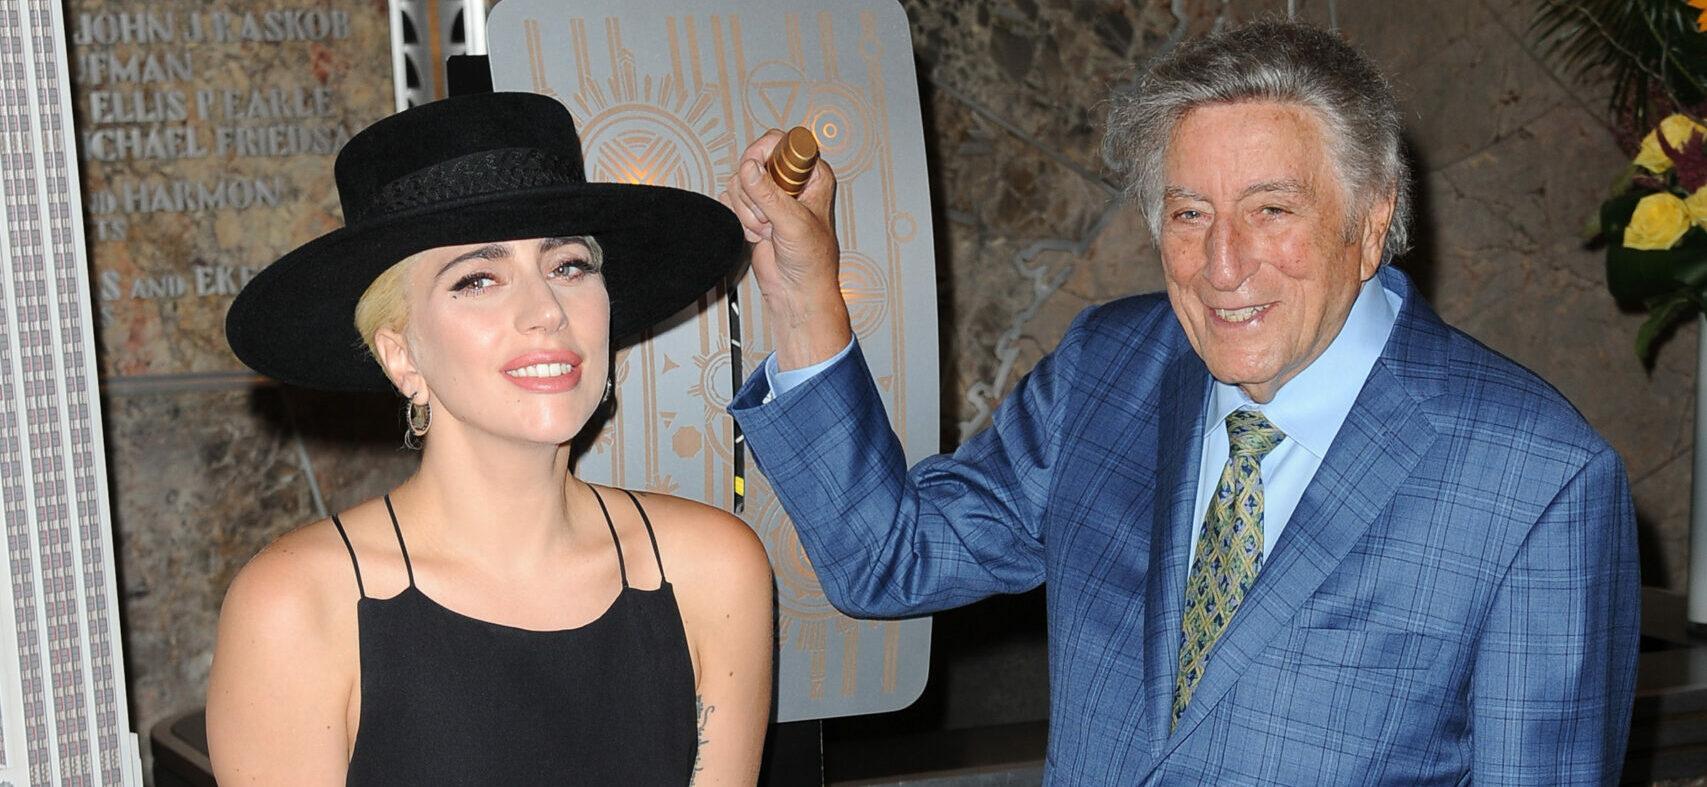 Lady Gaga & Tony Bennett at the Empire State Building